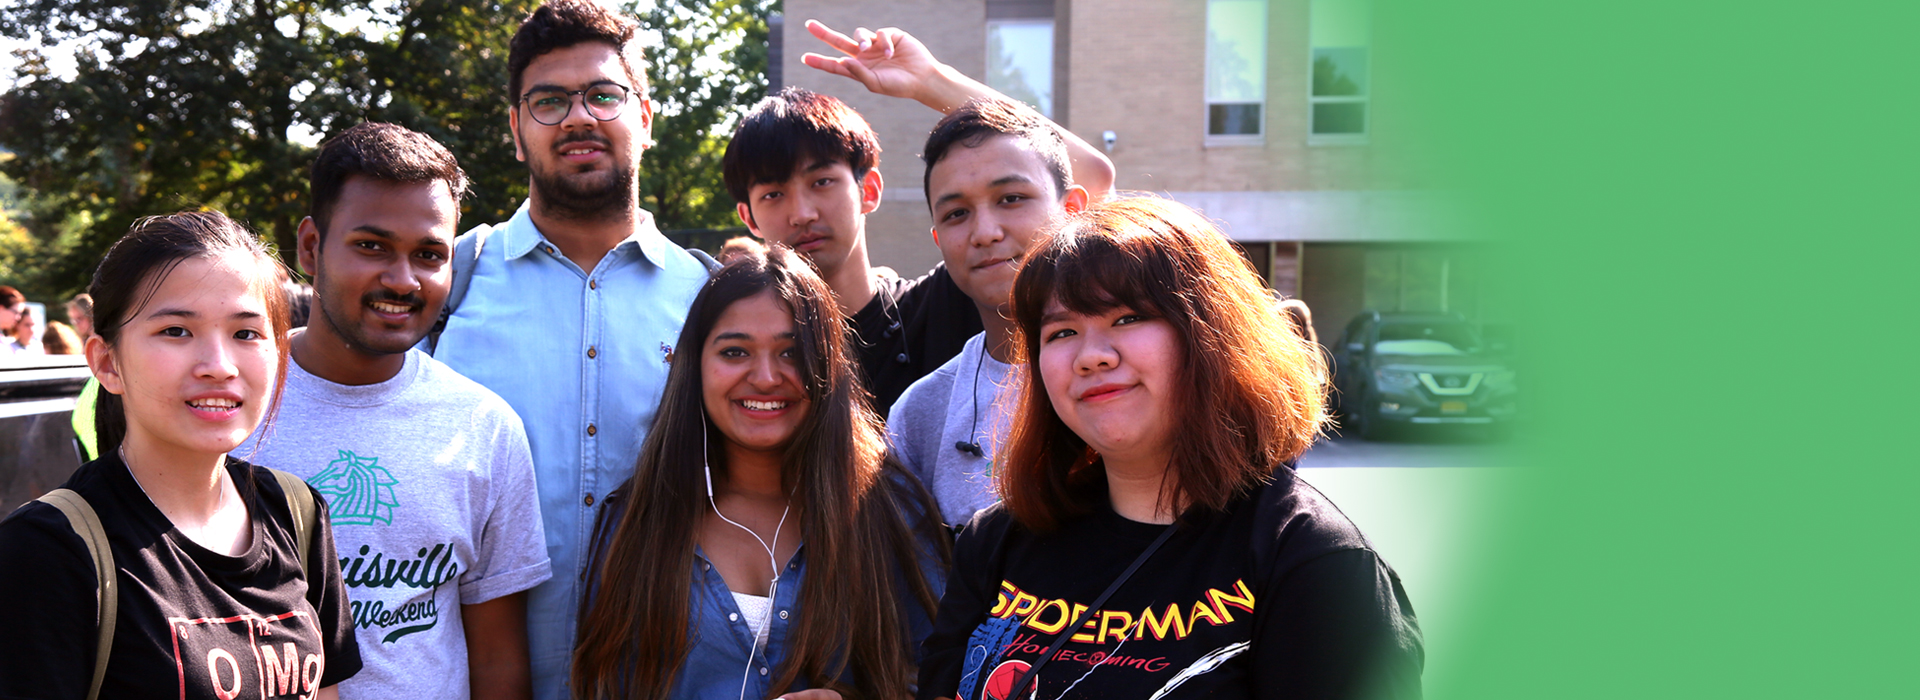 Diverse group of students smiling in front of a building and trees.